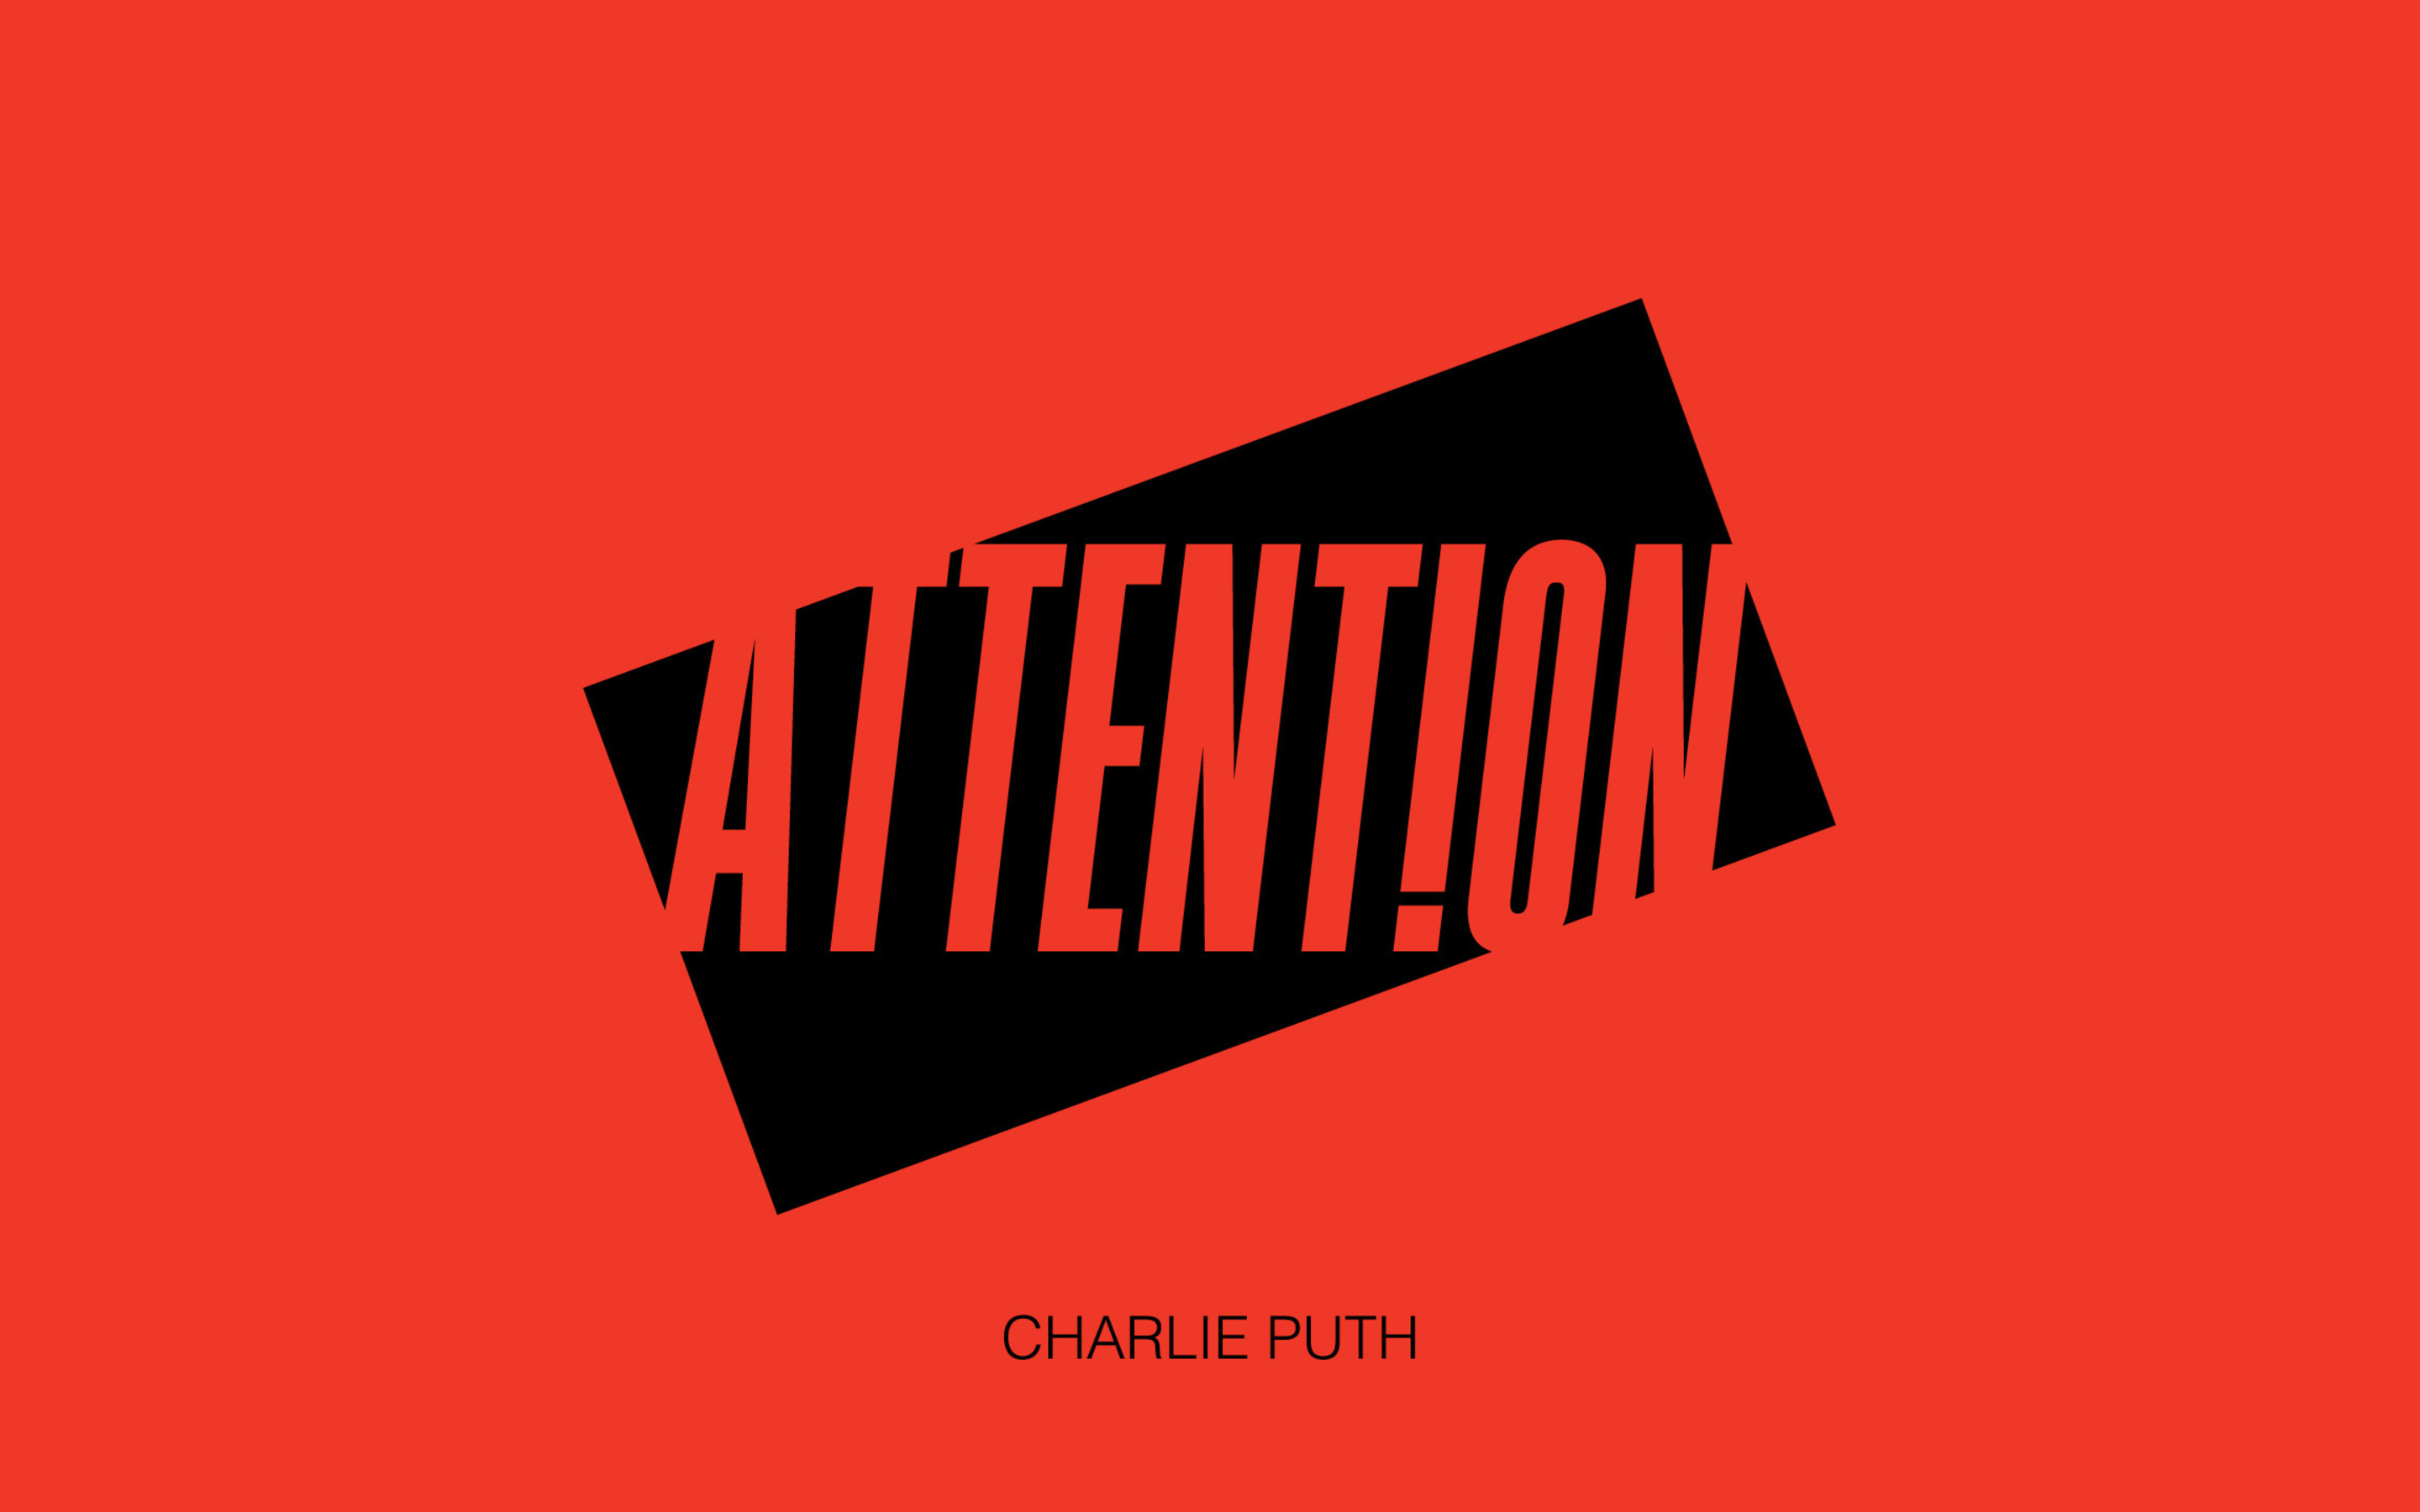 Charlie puth attention текст